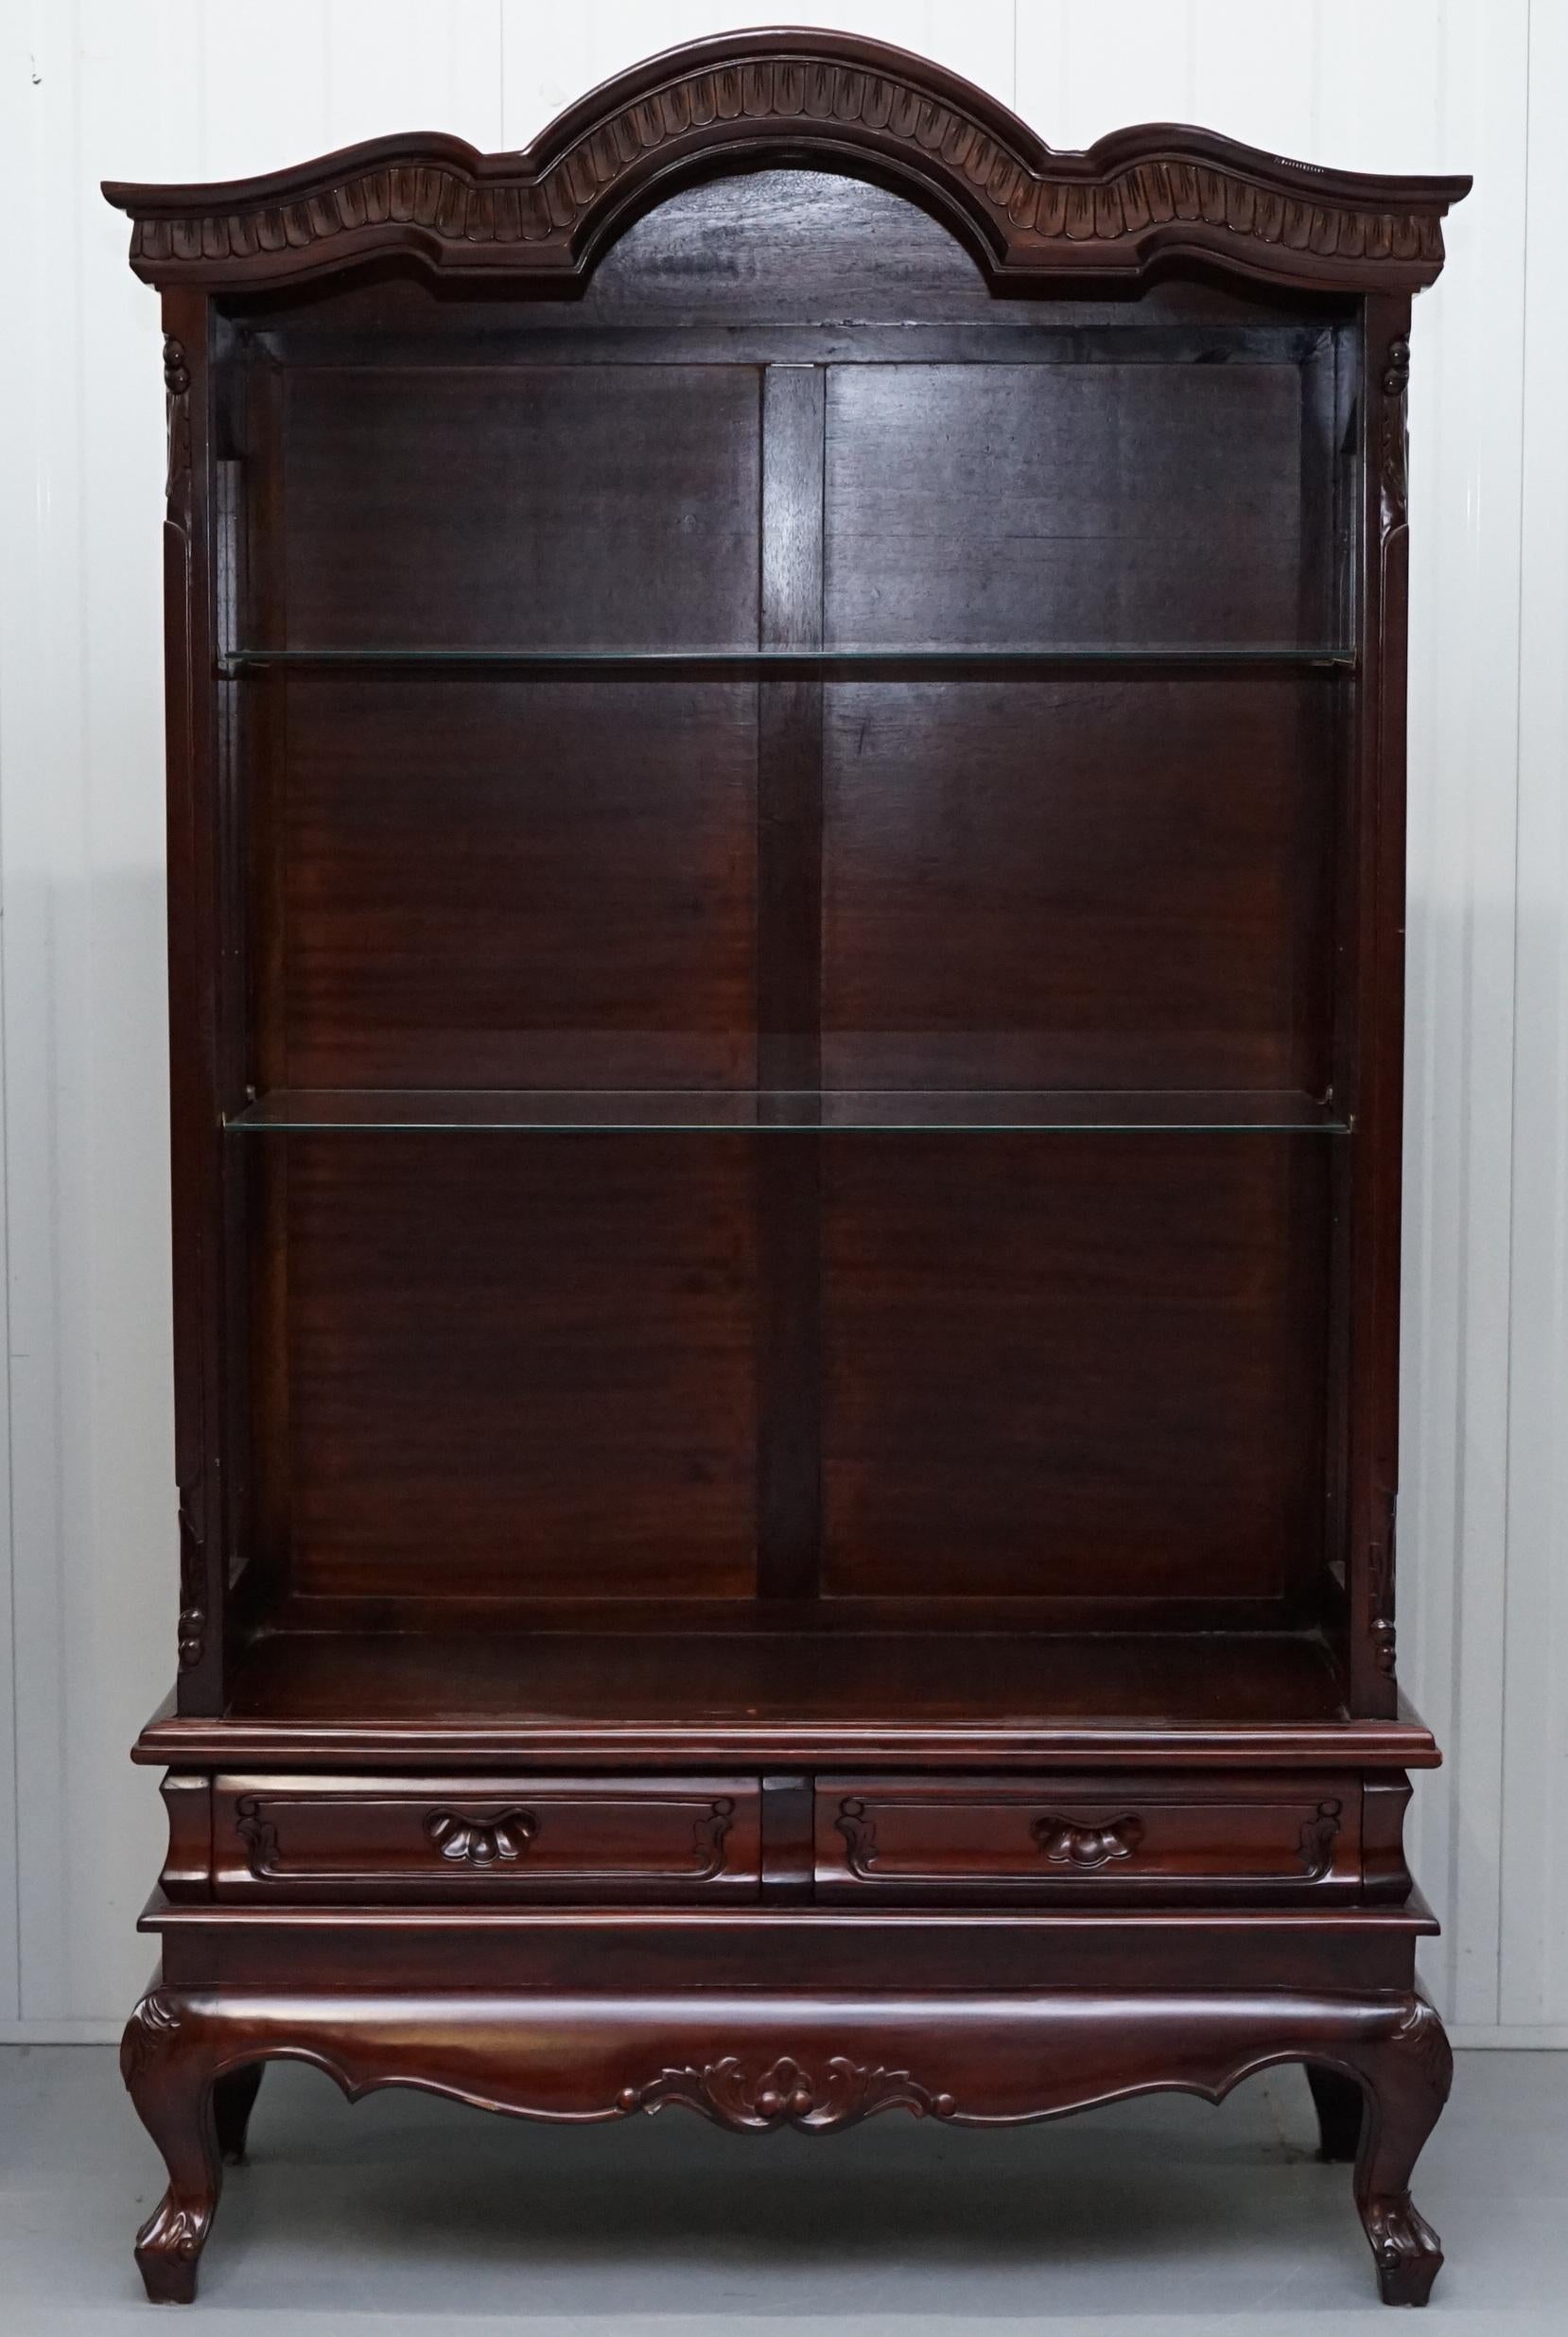 We are delighted to offer for sale this lovely ornately carved solid Mahogany glass shelved display cabinet

A well-made piece of furniture that looks amazing from every angle

We have cleaned waxed and polished it from top to bottom, the